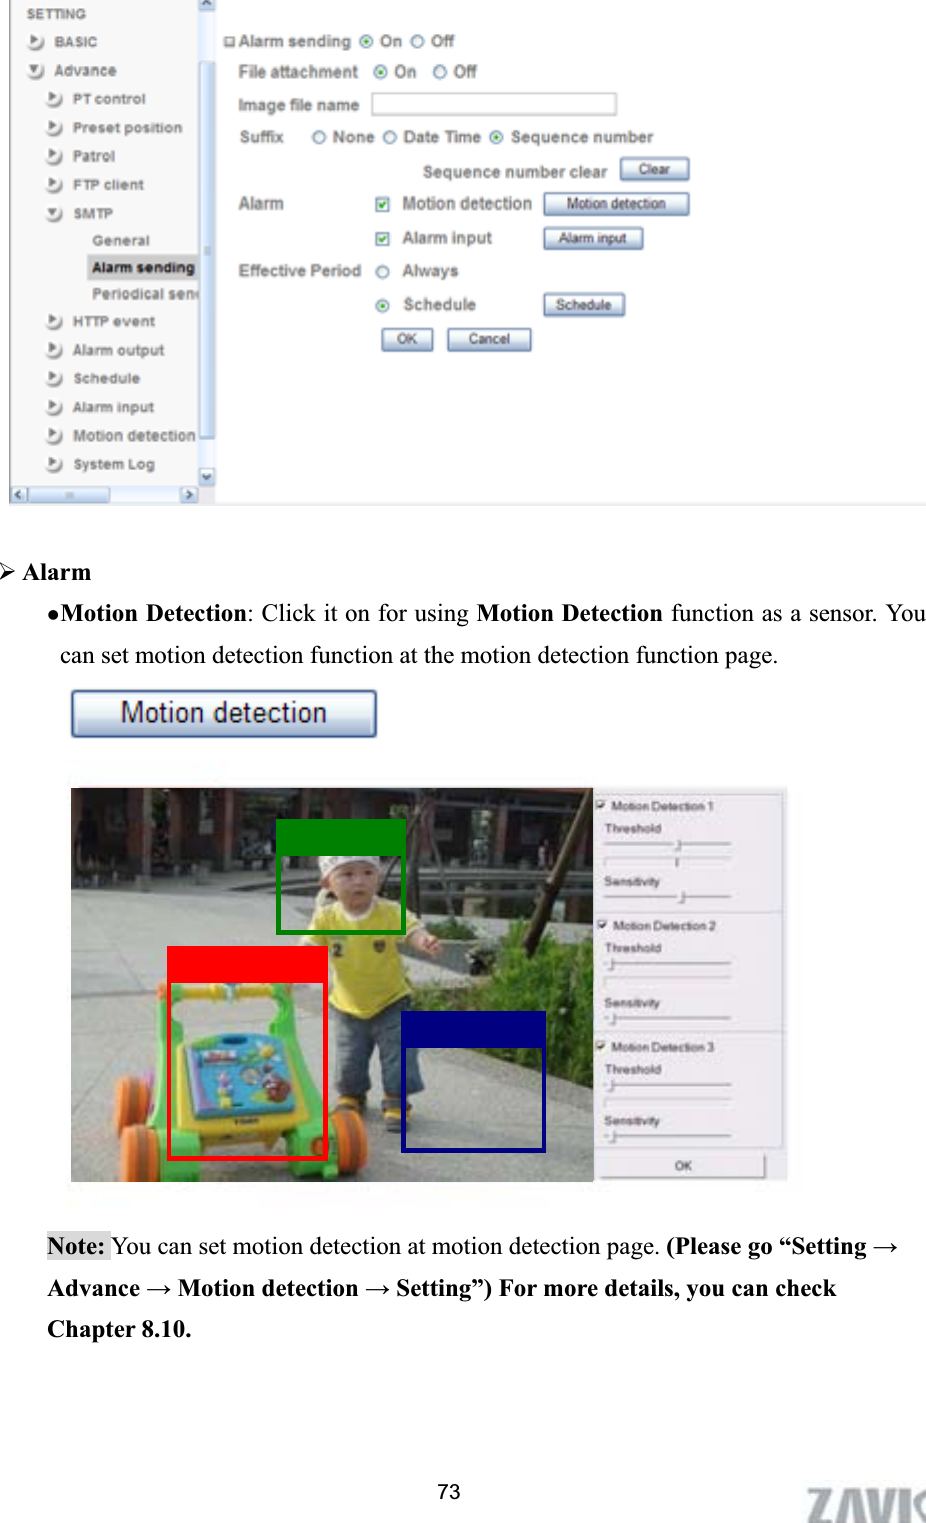      ¾AlarmzMotion Detection: Click it on for using Motion Detection function as a sensor. You can set motion detection function at the motion detection function page. Note: You can set motion detection at motion detection page. (Please go “Setting ĺAdvance ĺ Motion detection ĺ Setting”) For more details, you can check Chapter 8.10. 73